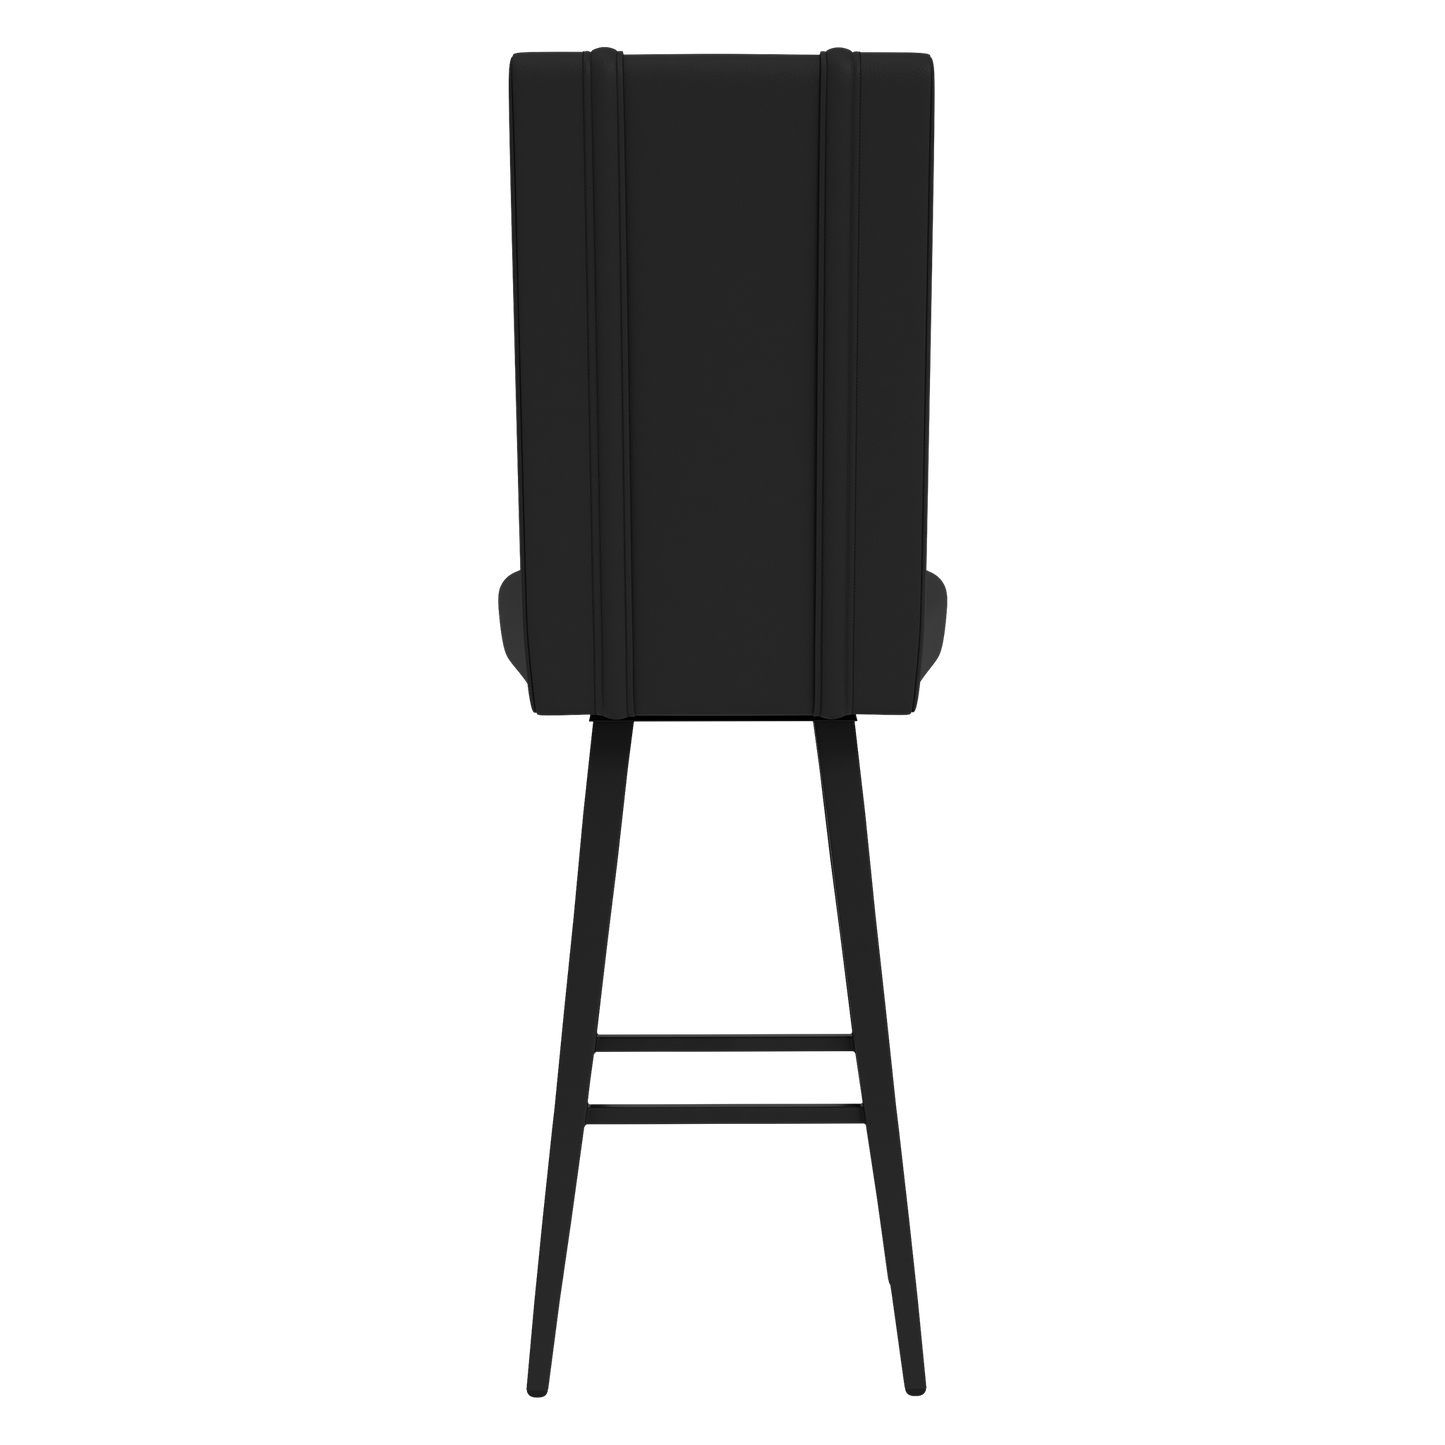 Swivel Bar Stool 2000 with Celtics Crossover Gaming Primary [CAN ONLY BE SHIPPED TO MASSACHUSETTS]